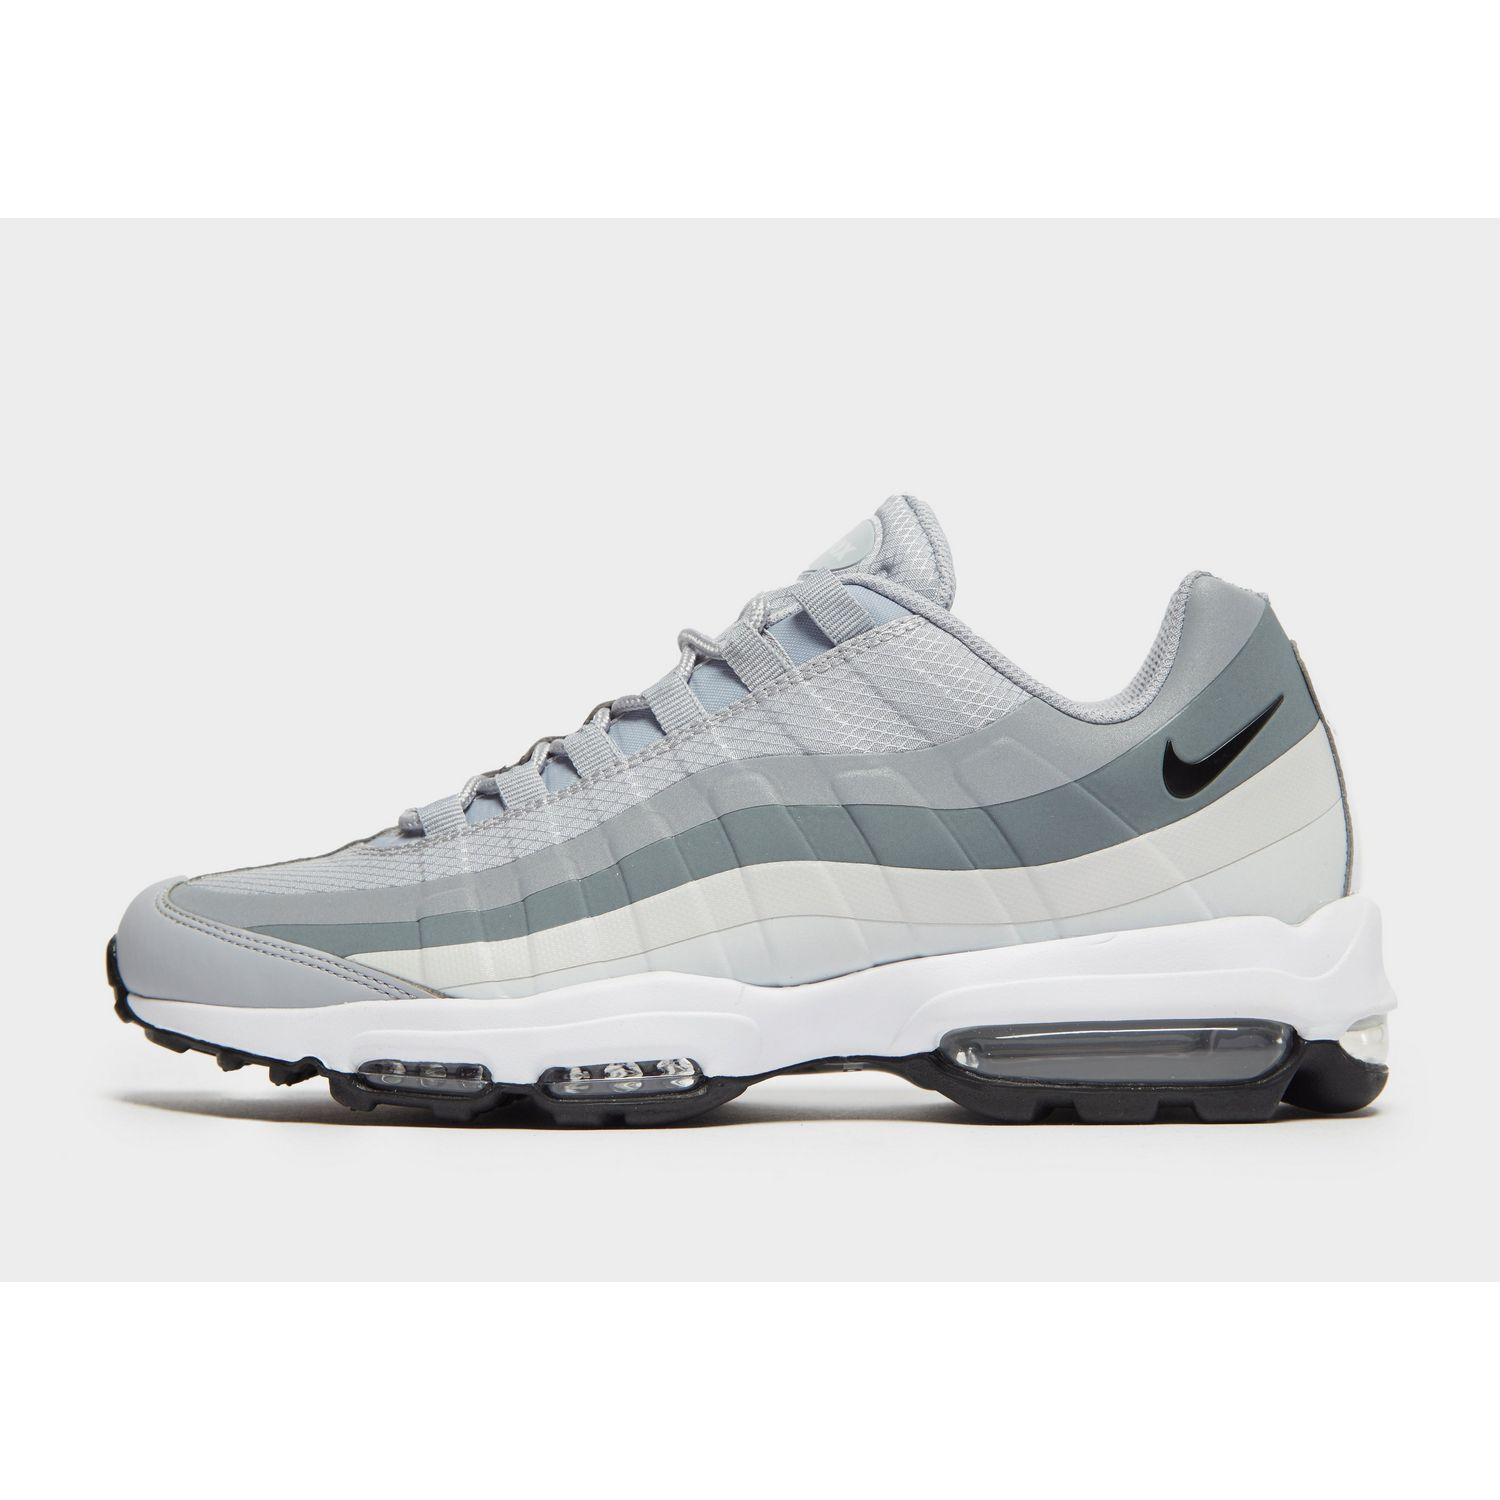 Nike Synthetic Air Max 95 Ultra Se in Grey (Gray) for Men - Lyst